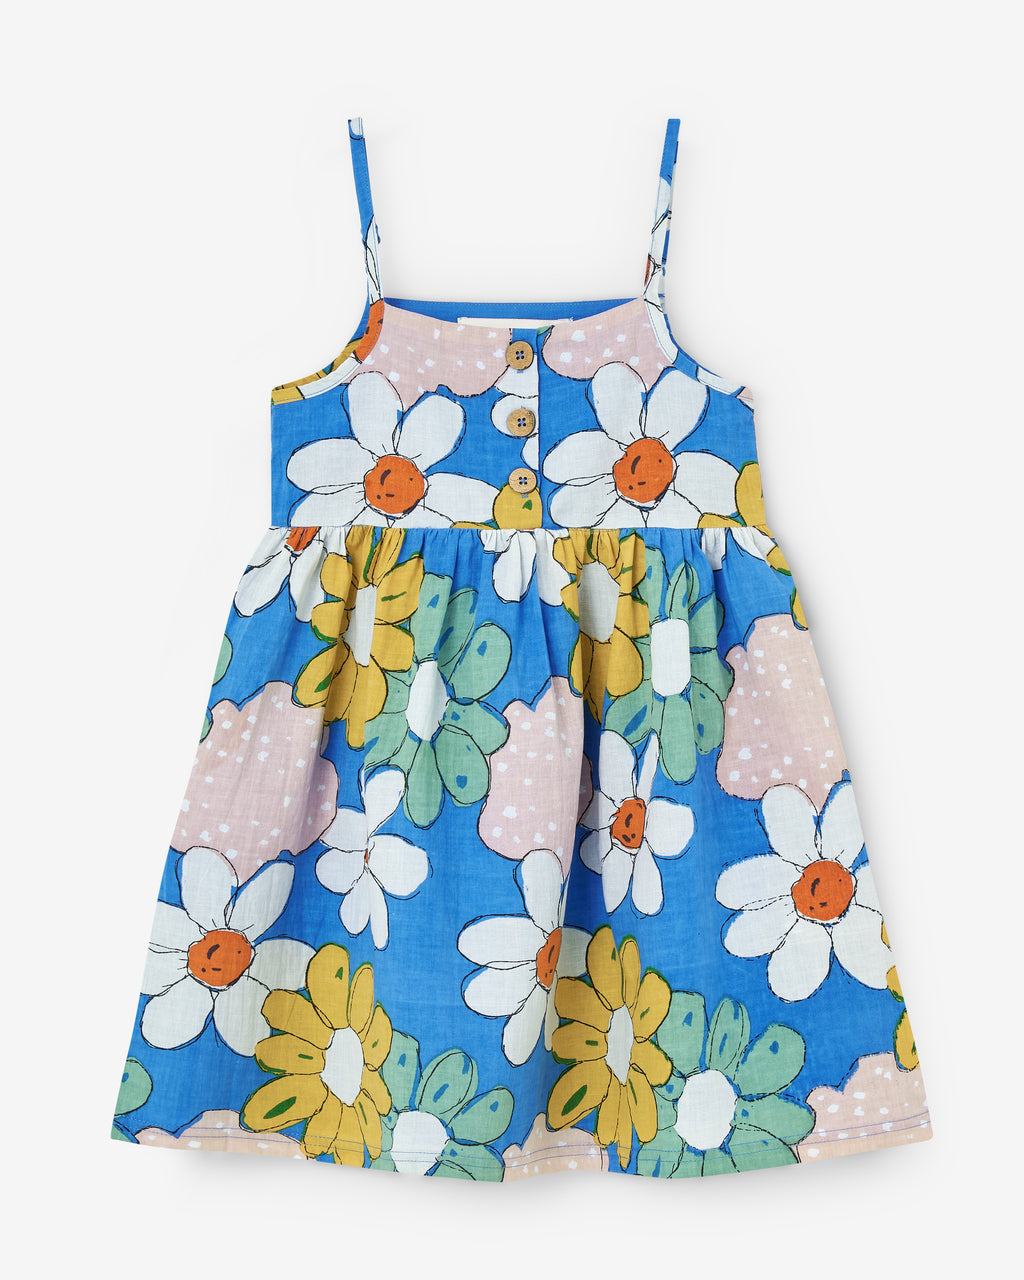 Blue dress with big yellow, green and white flowers. Centre opening with brown coconut buttons. Made by Nadadelazos